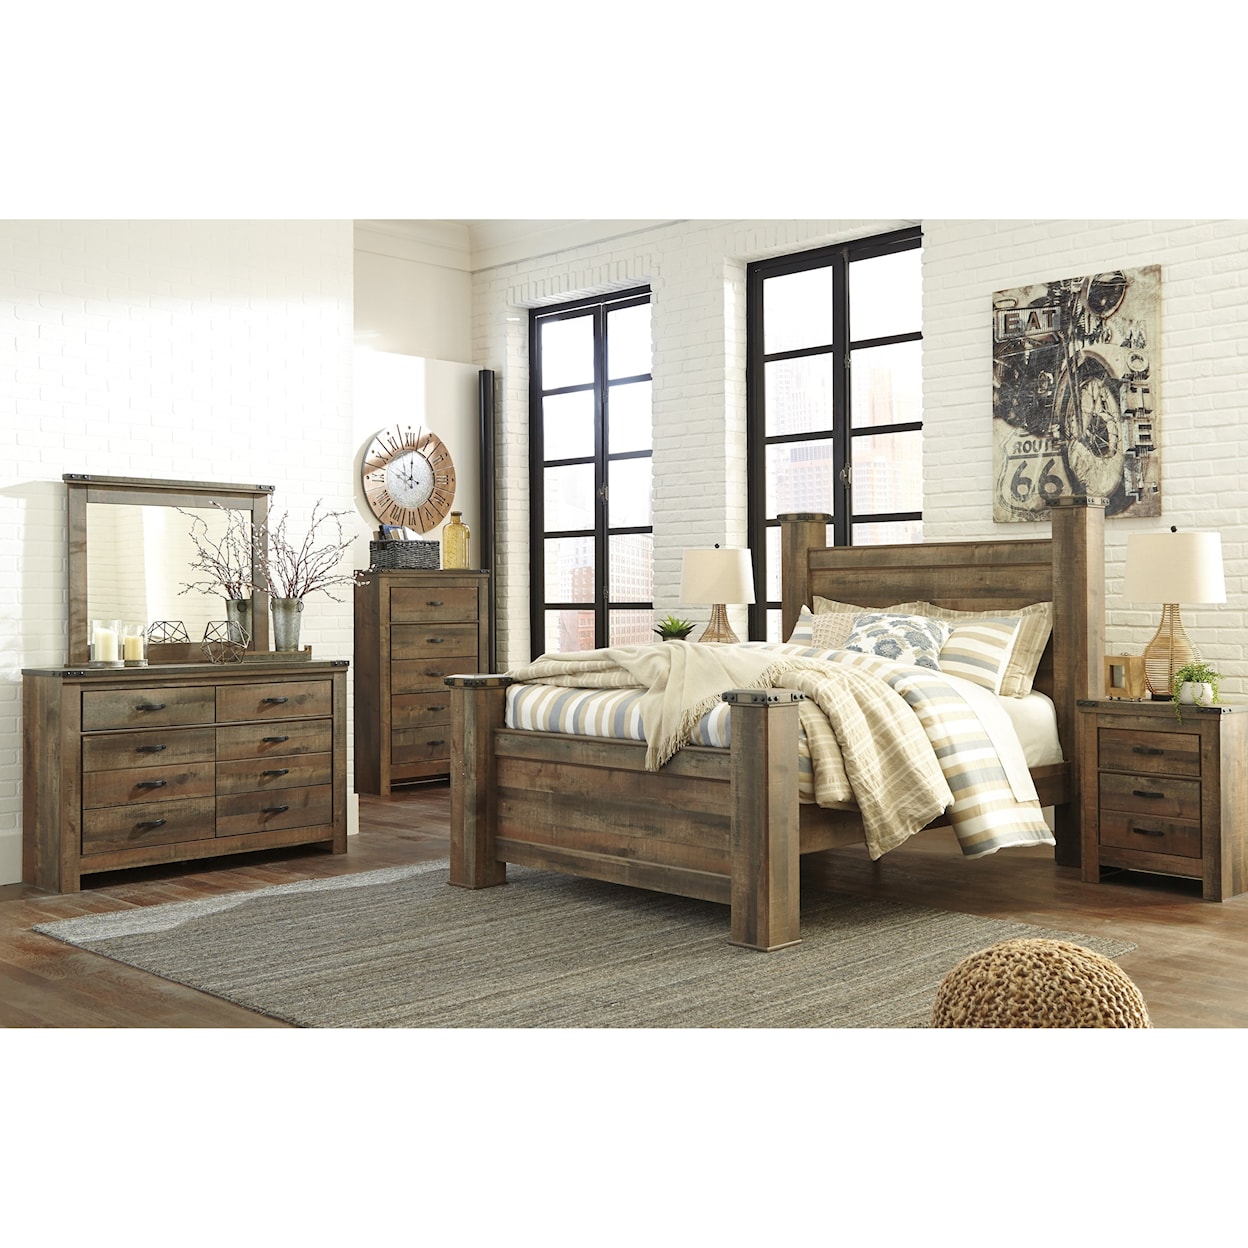 Signature Design by Ashley Furniture Trinell Queen Poster Bed